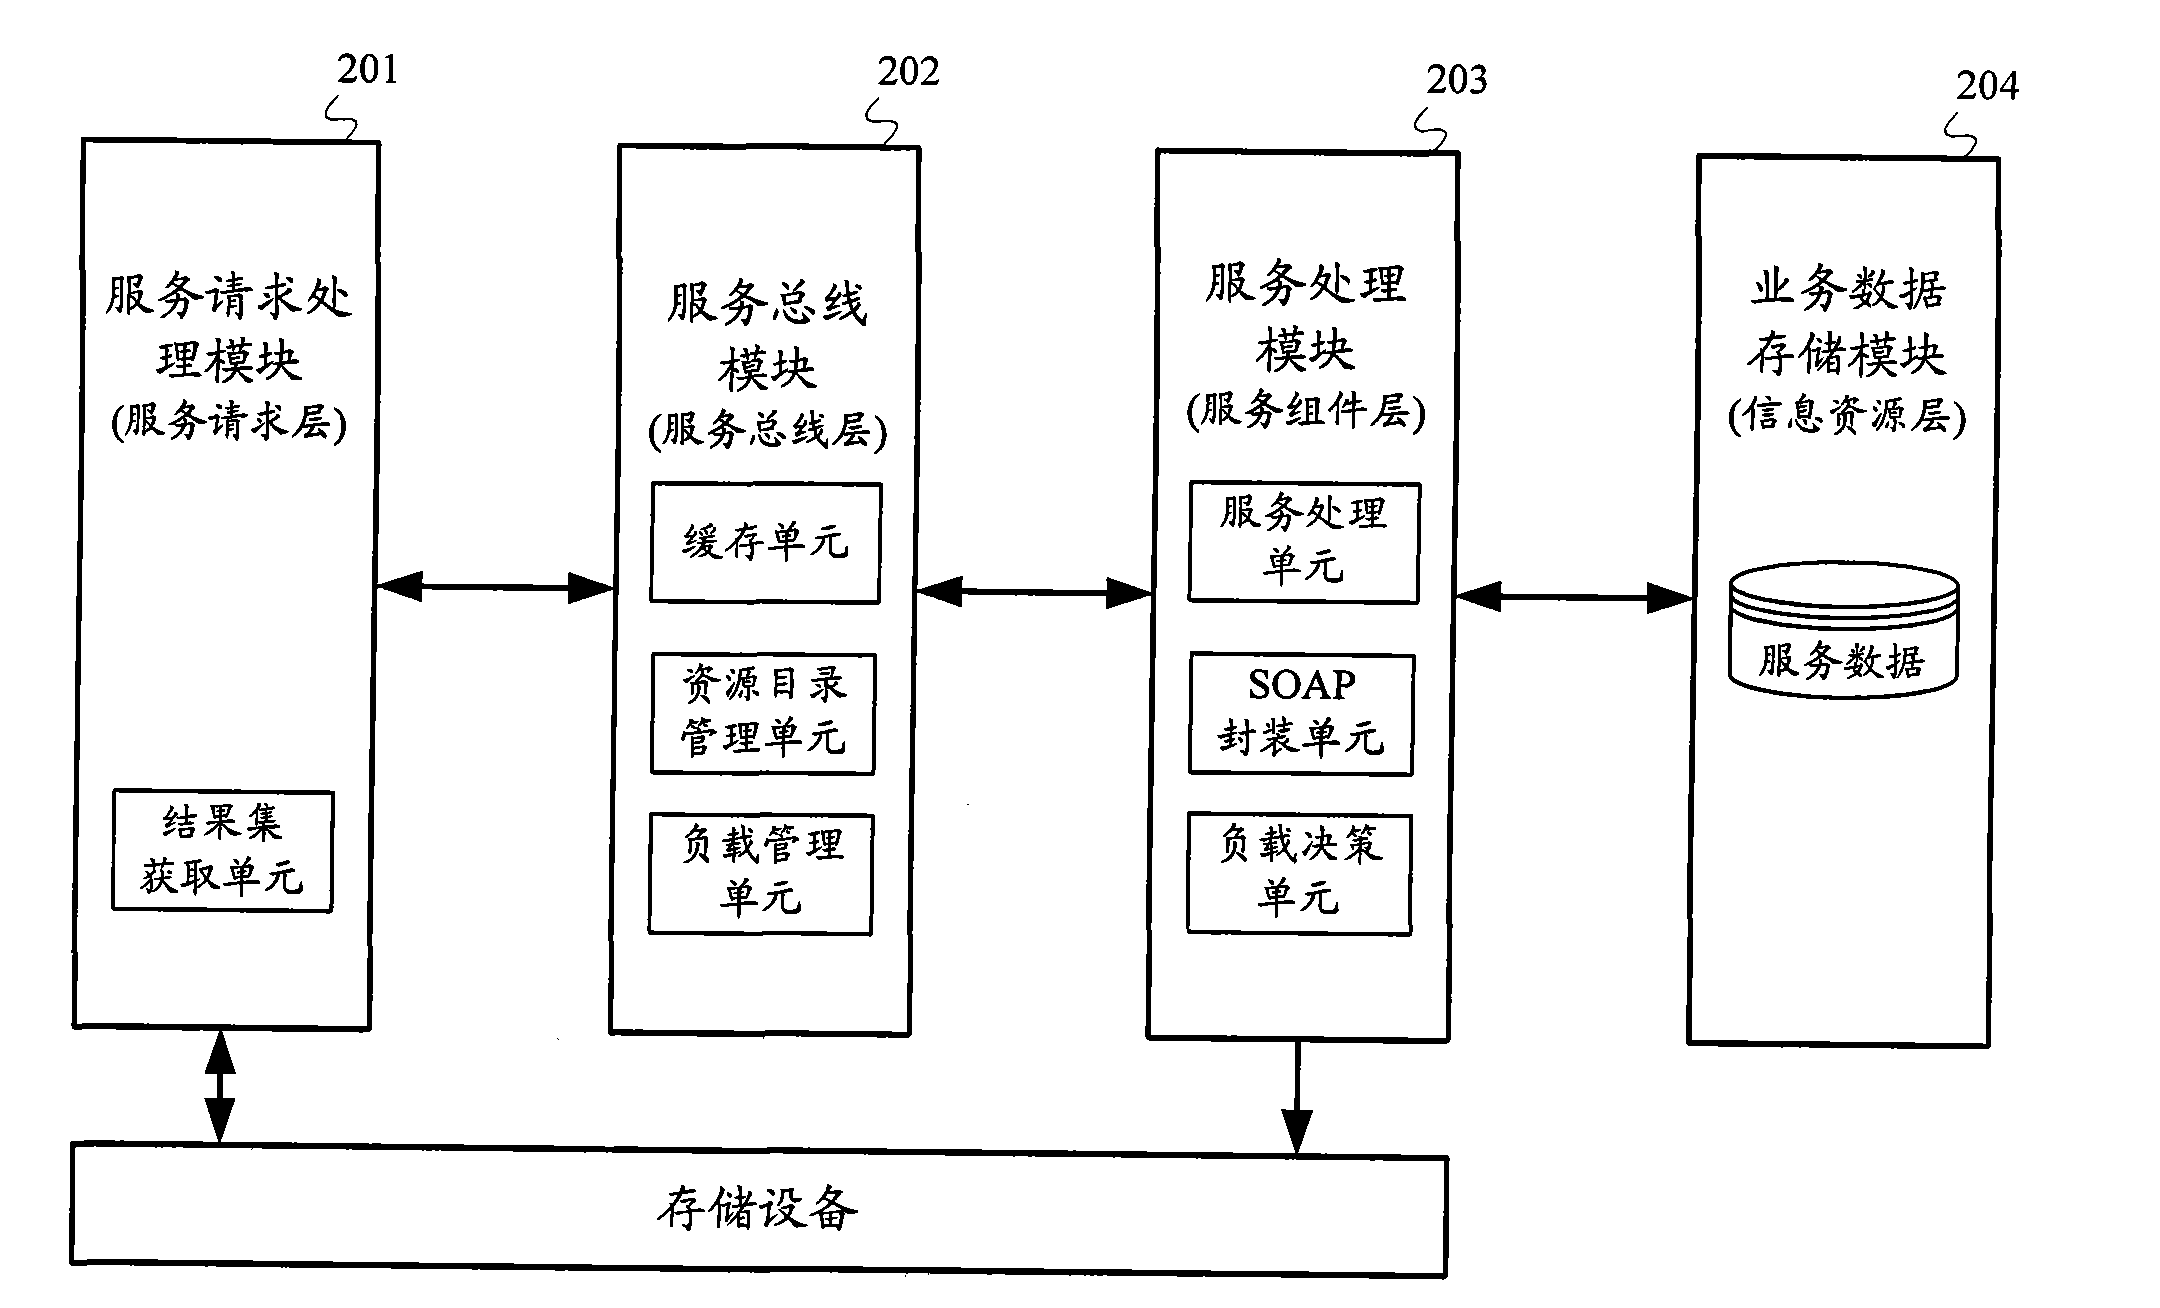 Service processing method and system based on SOA (Service Oriented Architecture)